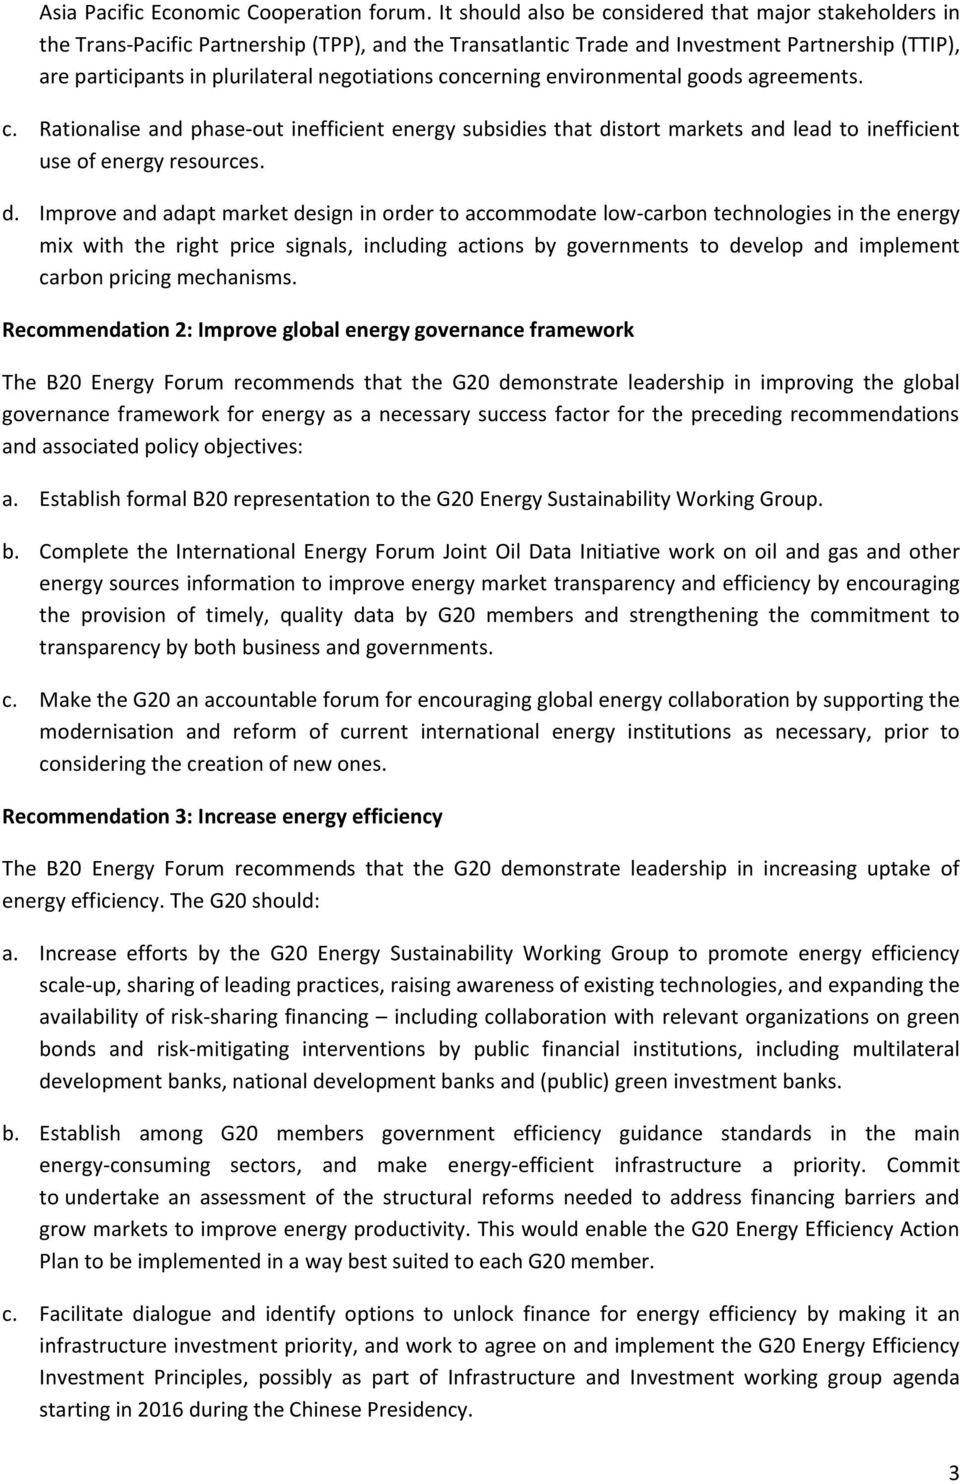 negotiations concerning environmental goods agreements. c. Rationalise and phase-out inefficient energy subsidies that di